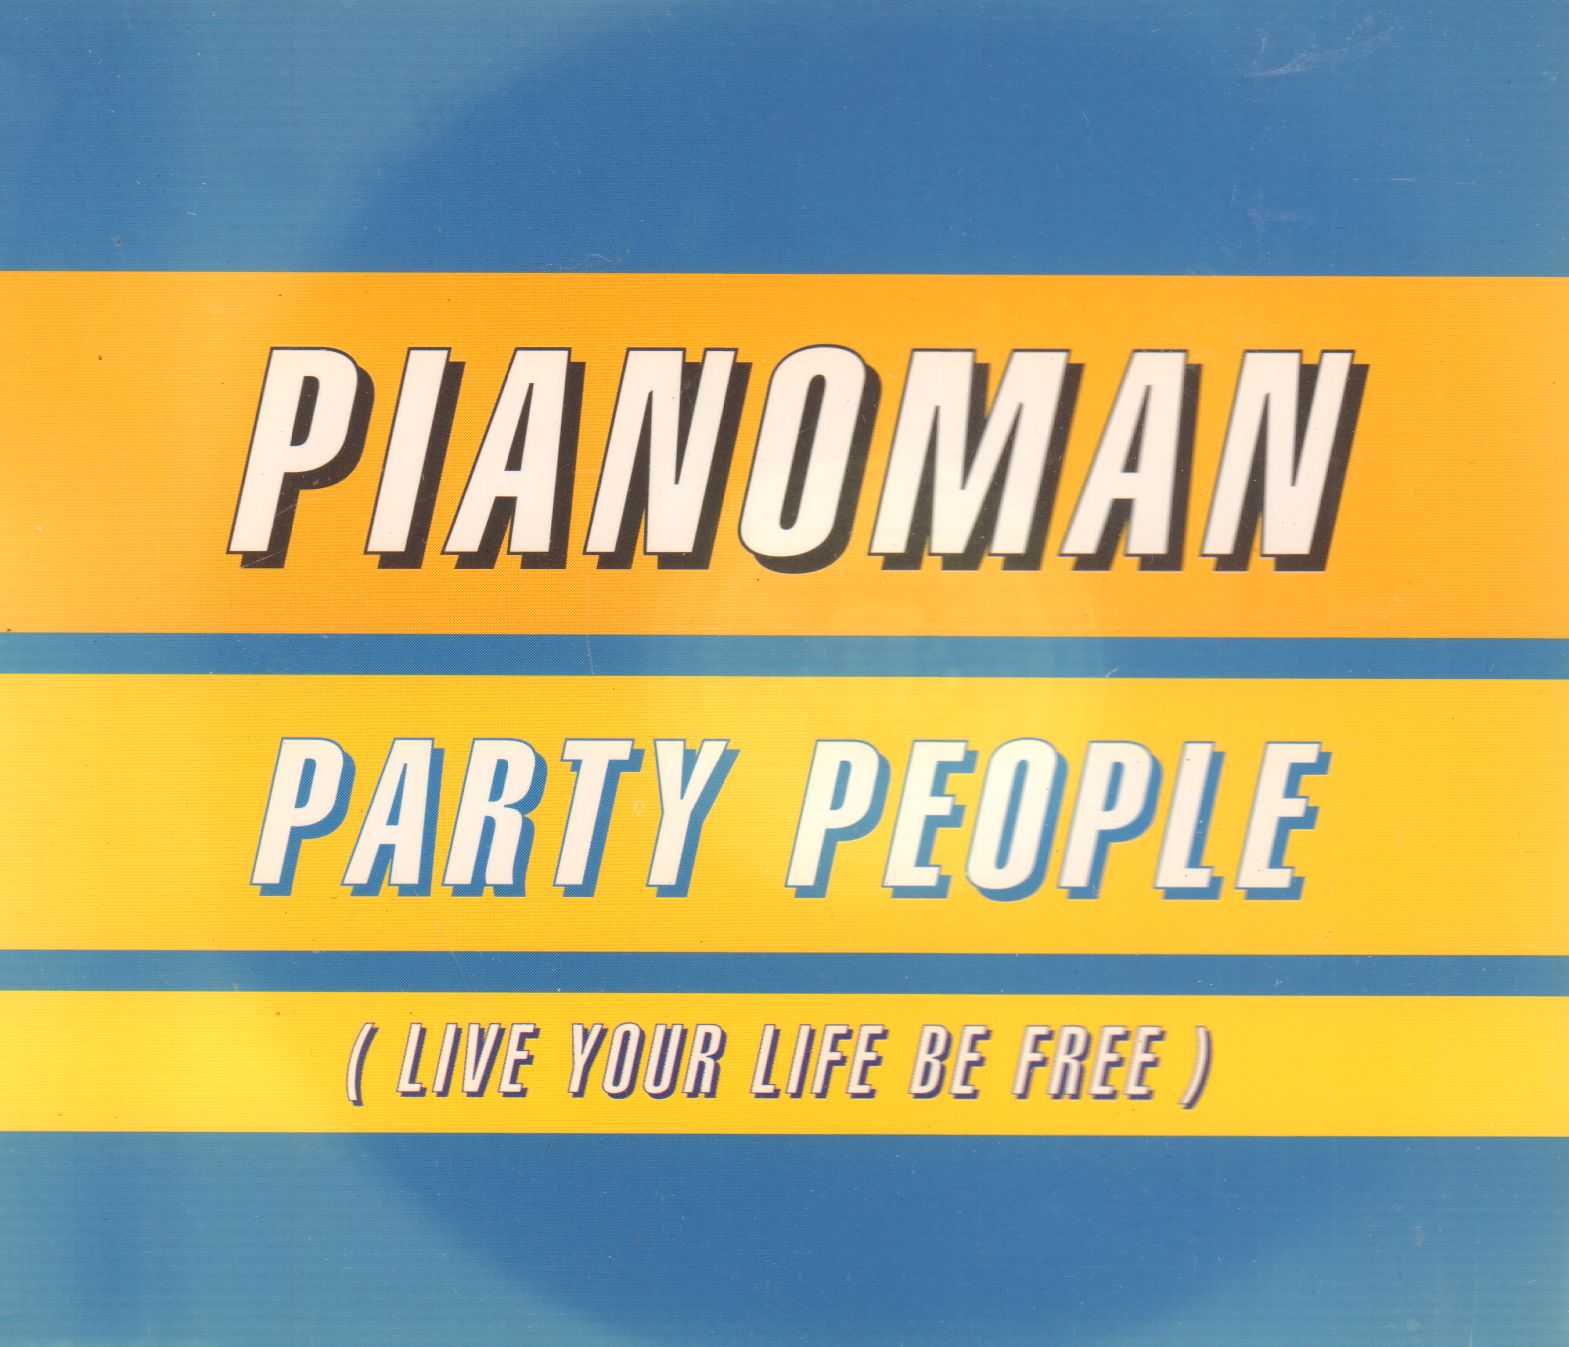 Party People (Live your life be free)-CD Single